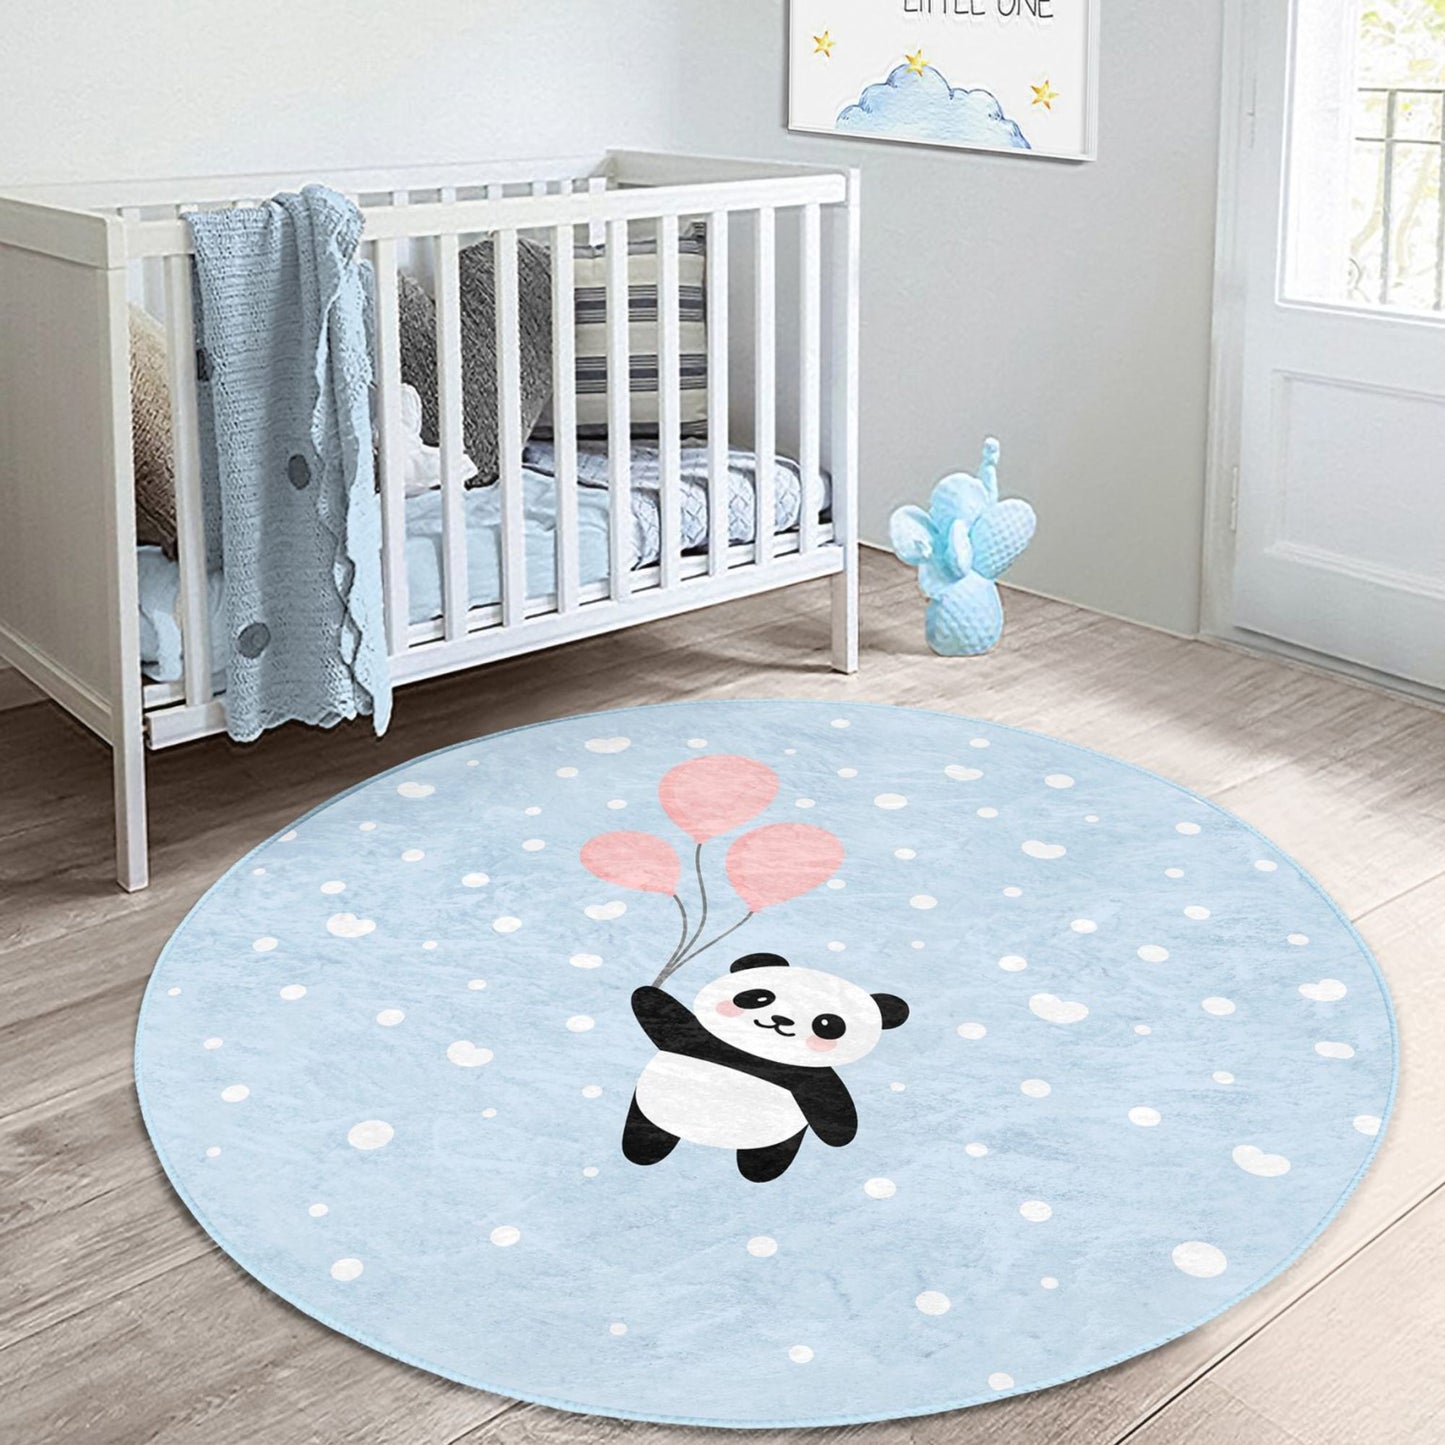 Homeezone's Panda Flying with Balloons Patterned Kids' Rug